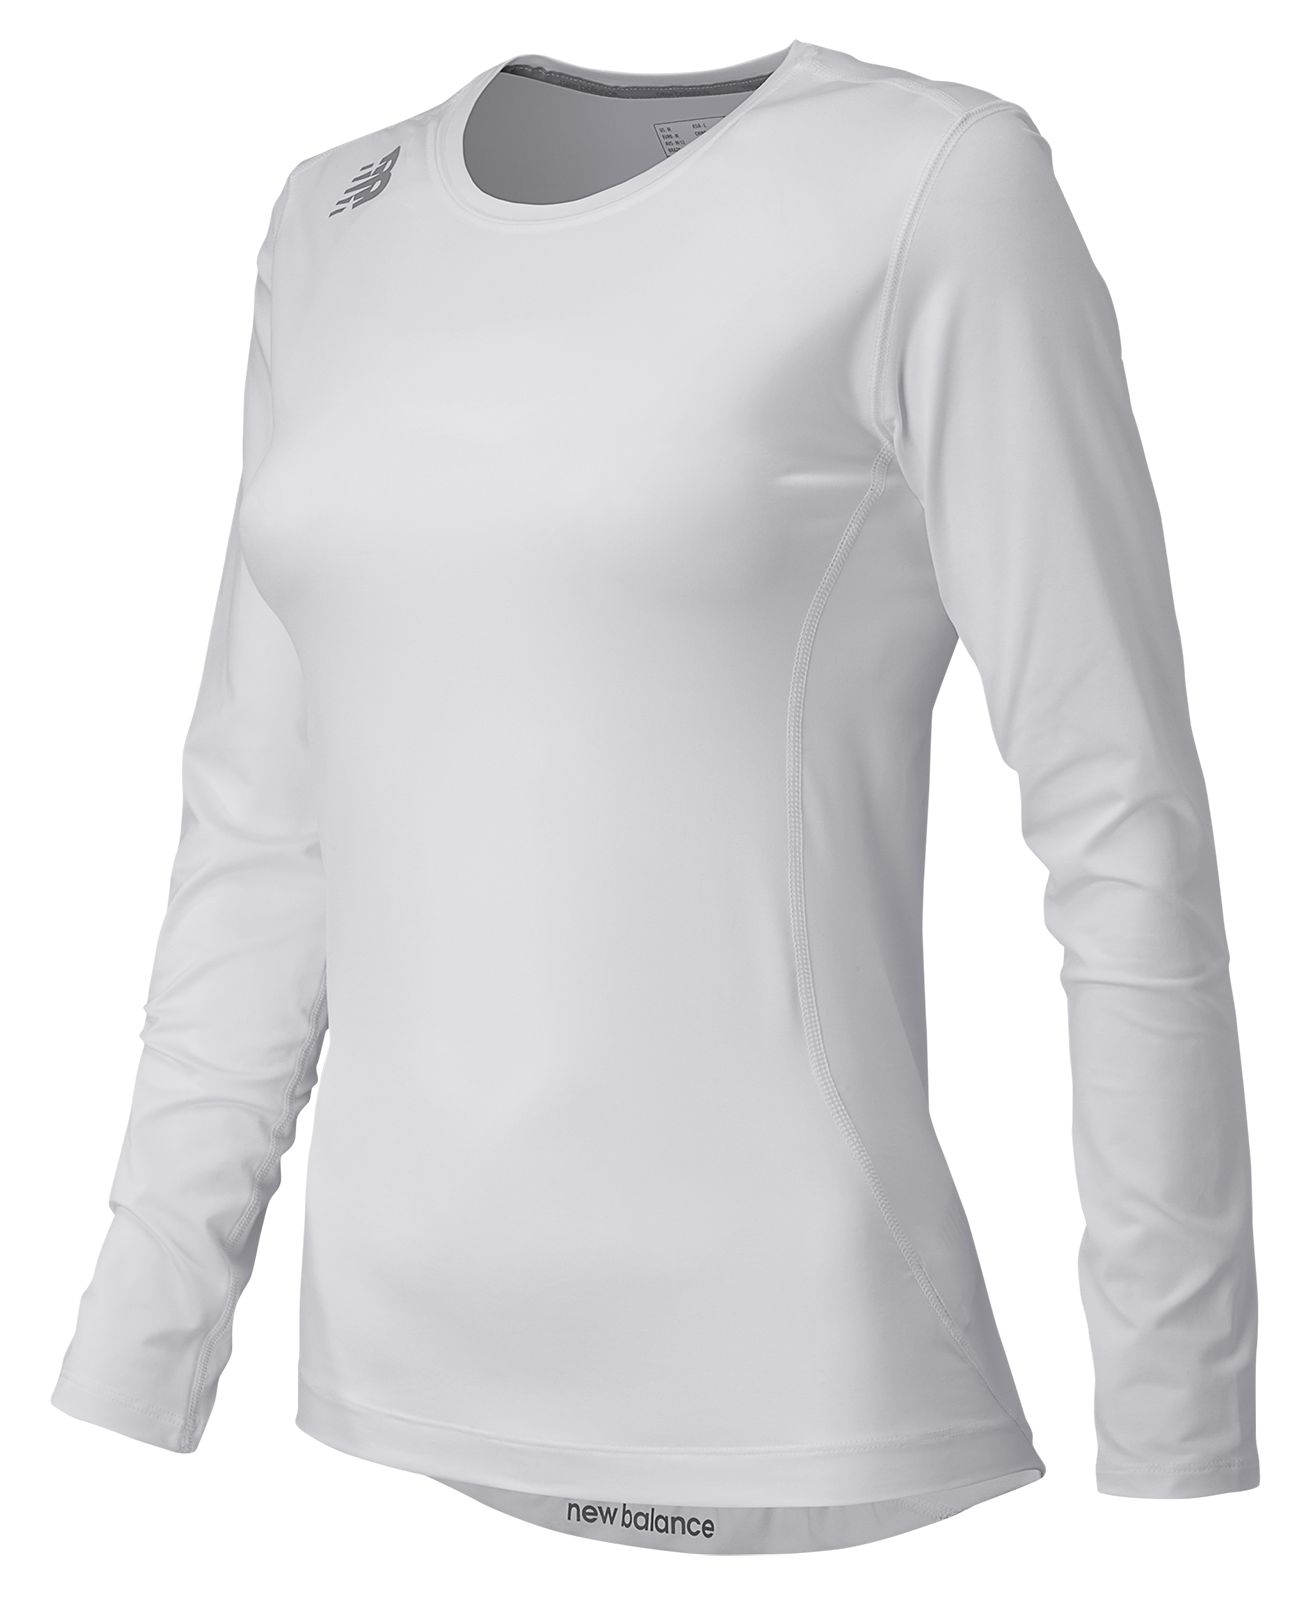 NB Long Sleeve Compression Top - New 